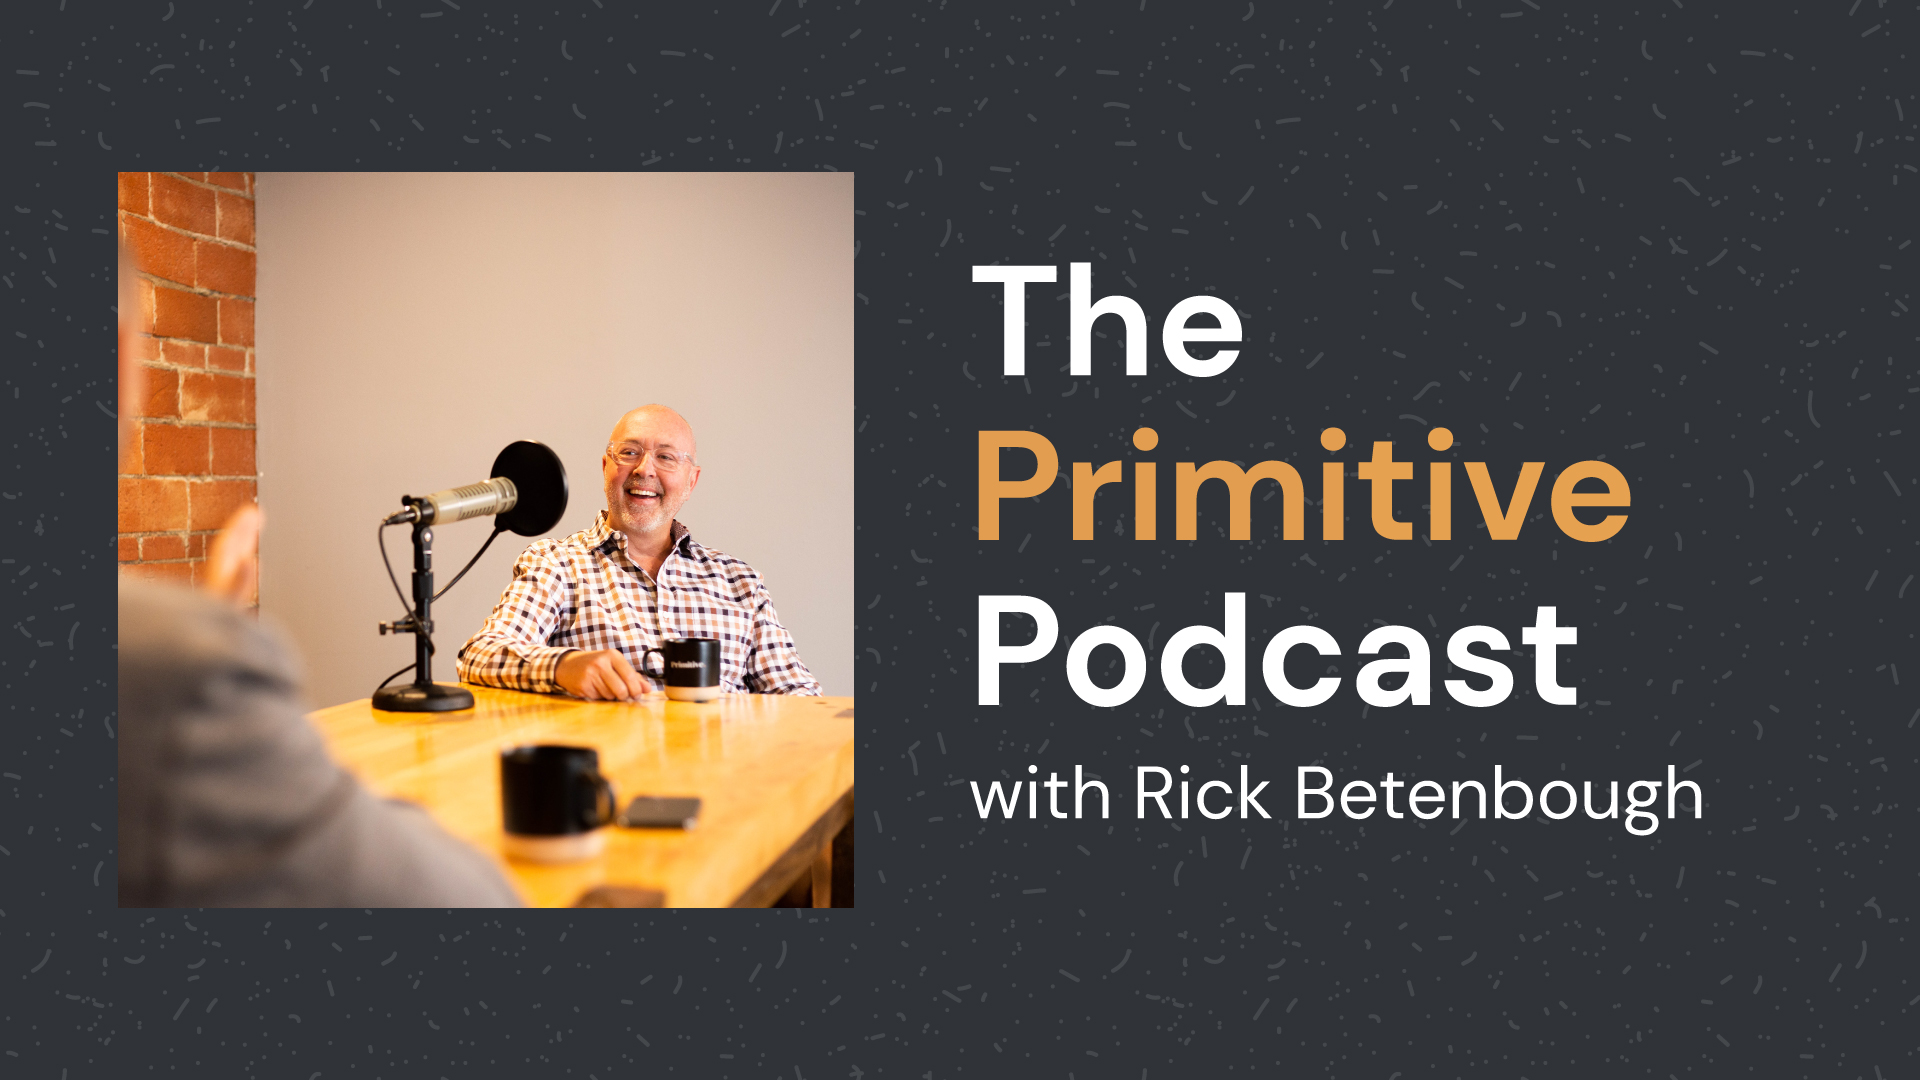 The Primitive Podcast with Rick Betenbough